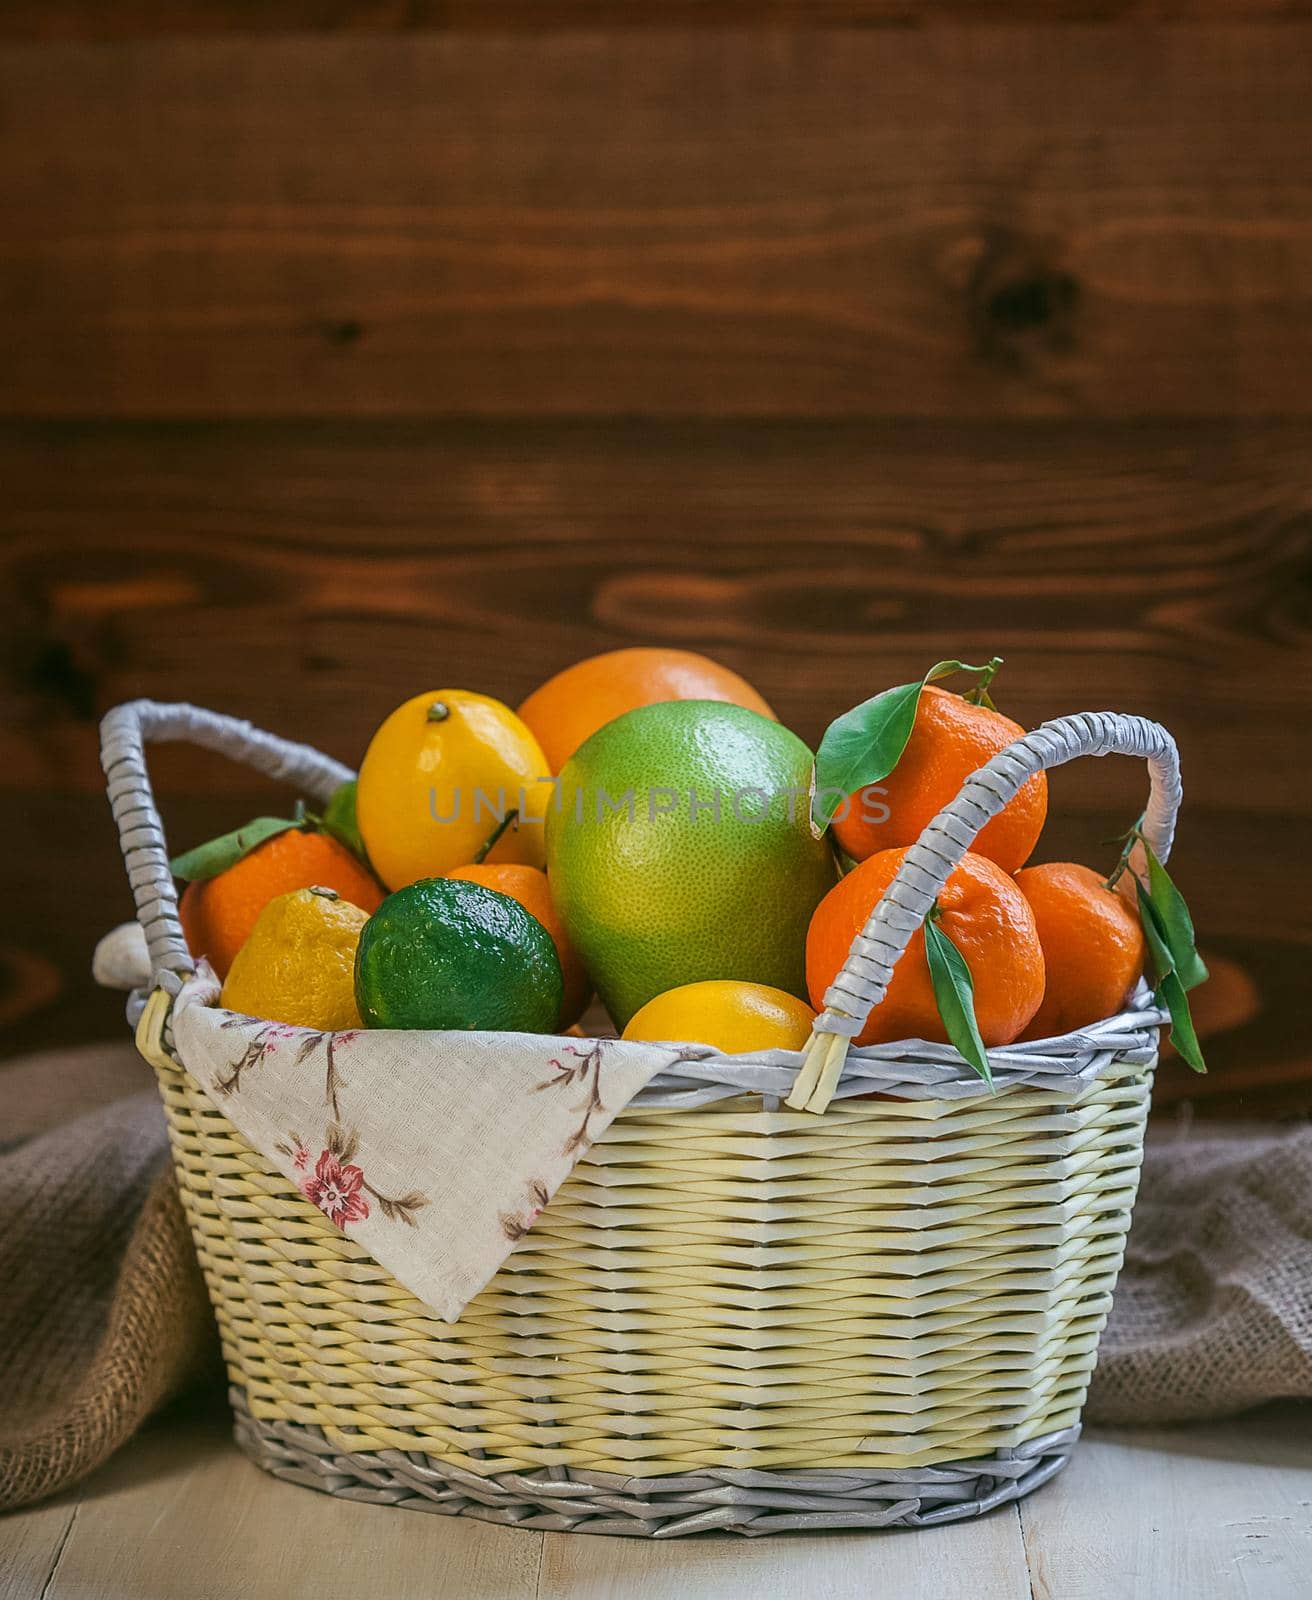 citrus fruits in a wicker basket on a wooden background by vvmich